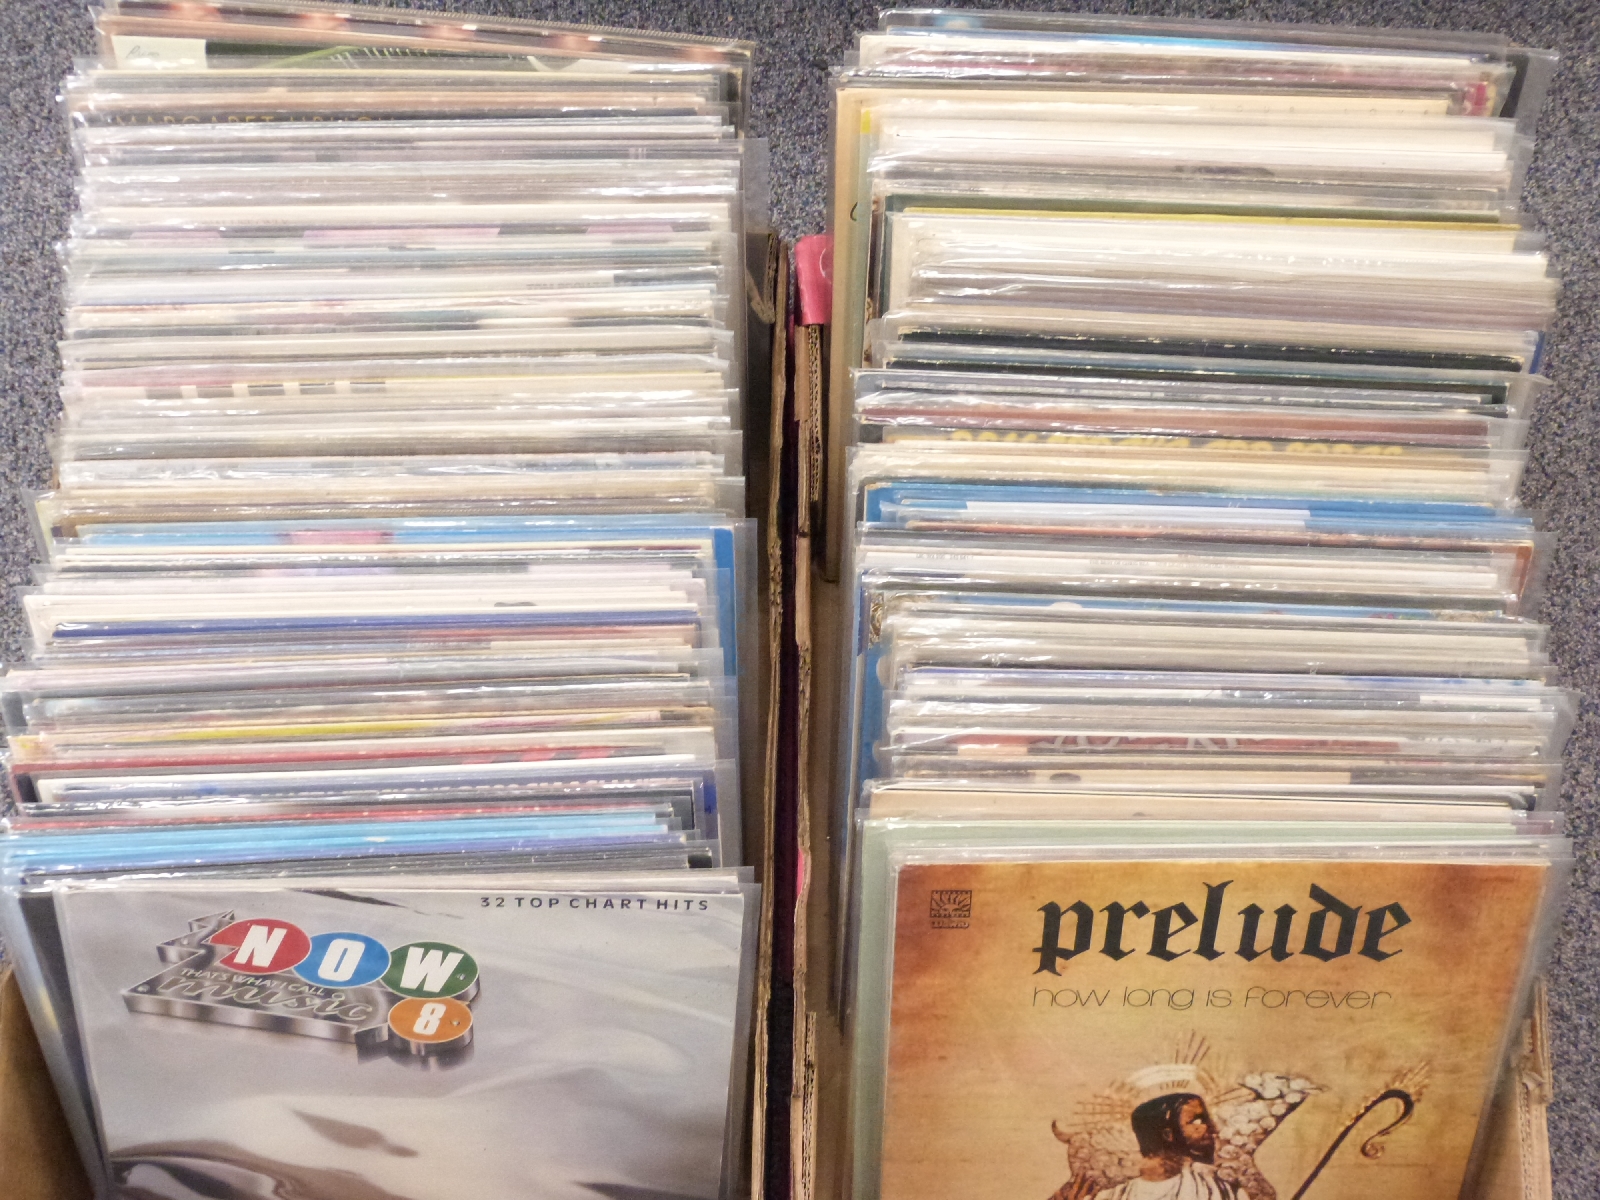 Approximately 190 albums including Pop, Tamla Motown, Disco, Now etc - Image 2 of 2